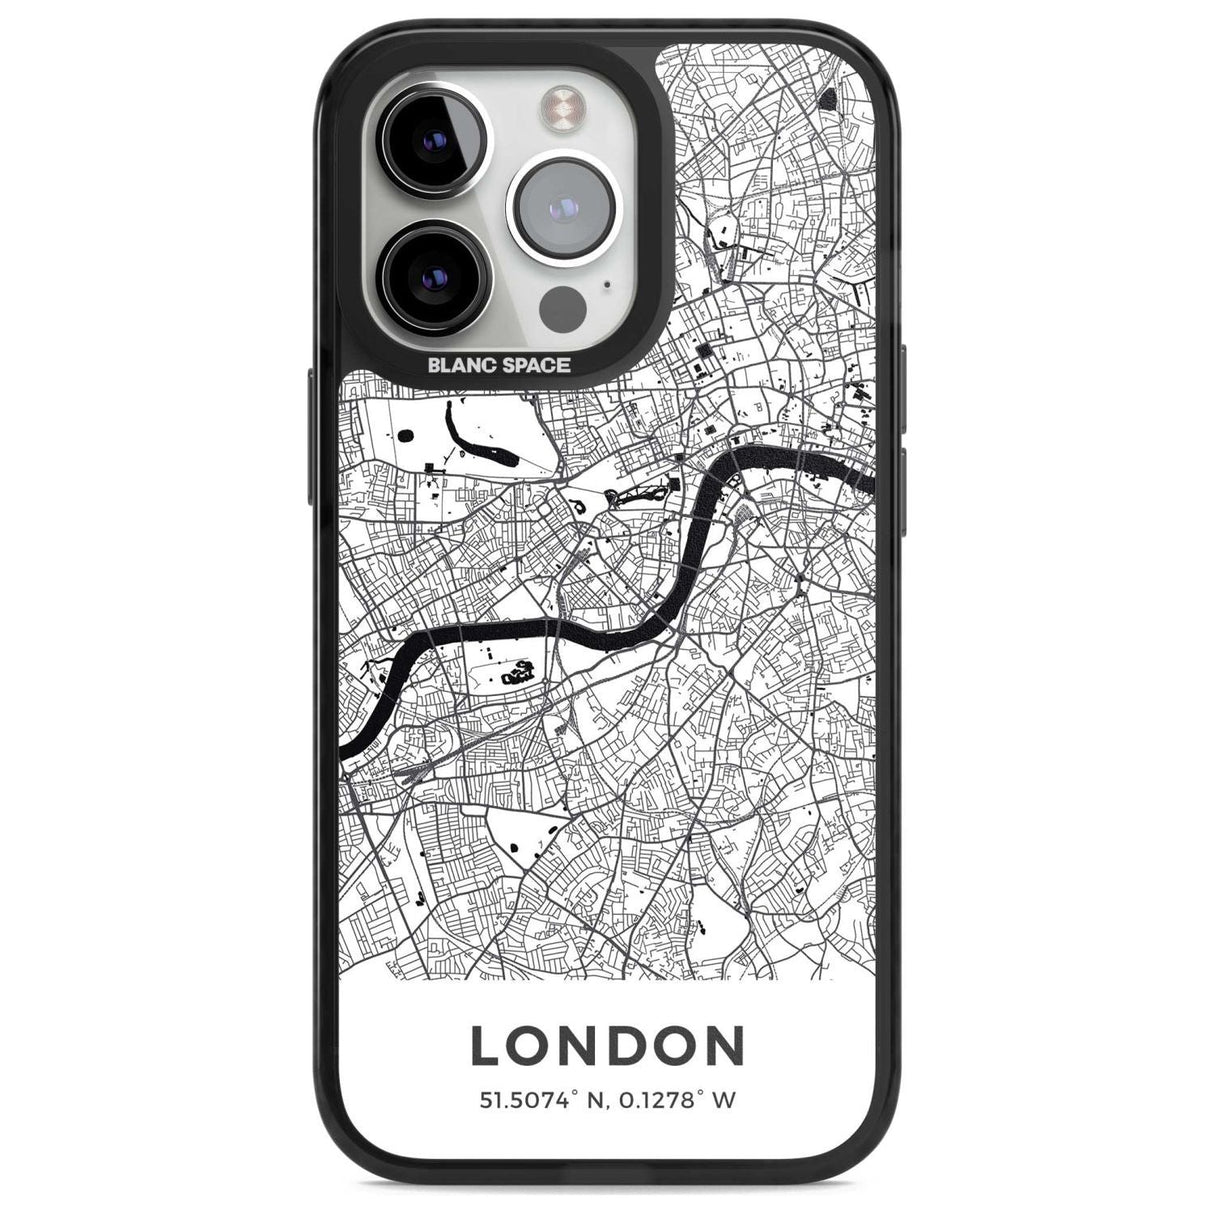 Map of London, England Phone Case iPhone 15 Pro Max / Magsafe Black Impact Case,iPhone 15 Pro / Magsafe Black Impact Case,iPhone 14 Pro Max / Magsafe Black Impact Case,iPhone 14 Pro / Magsafe Black Impact Case,iPhone 13 Pro / Magsafe Black Impact Case Blanc Space